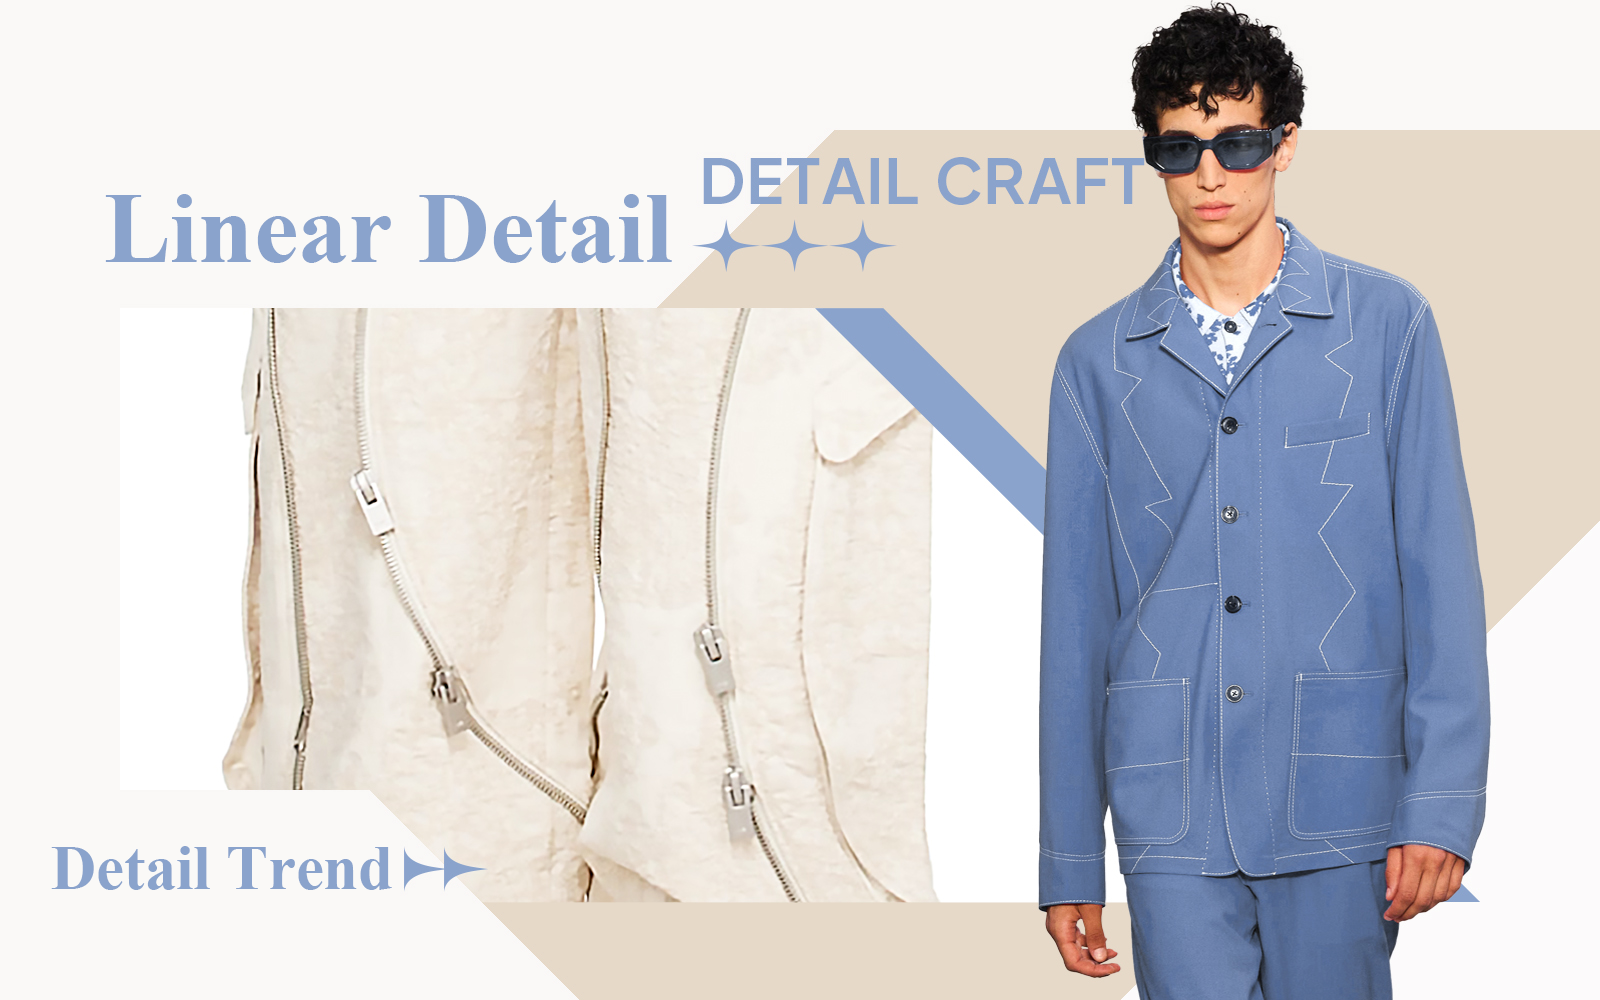 Linear design -- The Detail & Craft Trend for Menswear